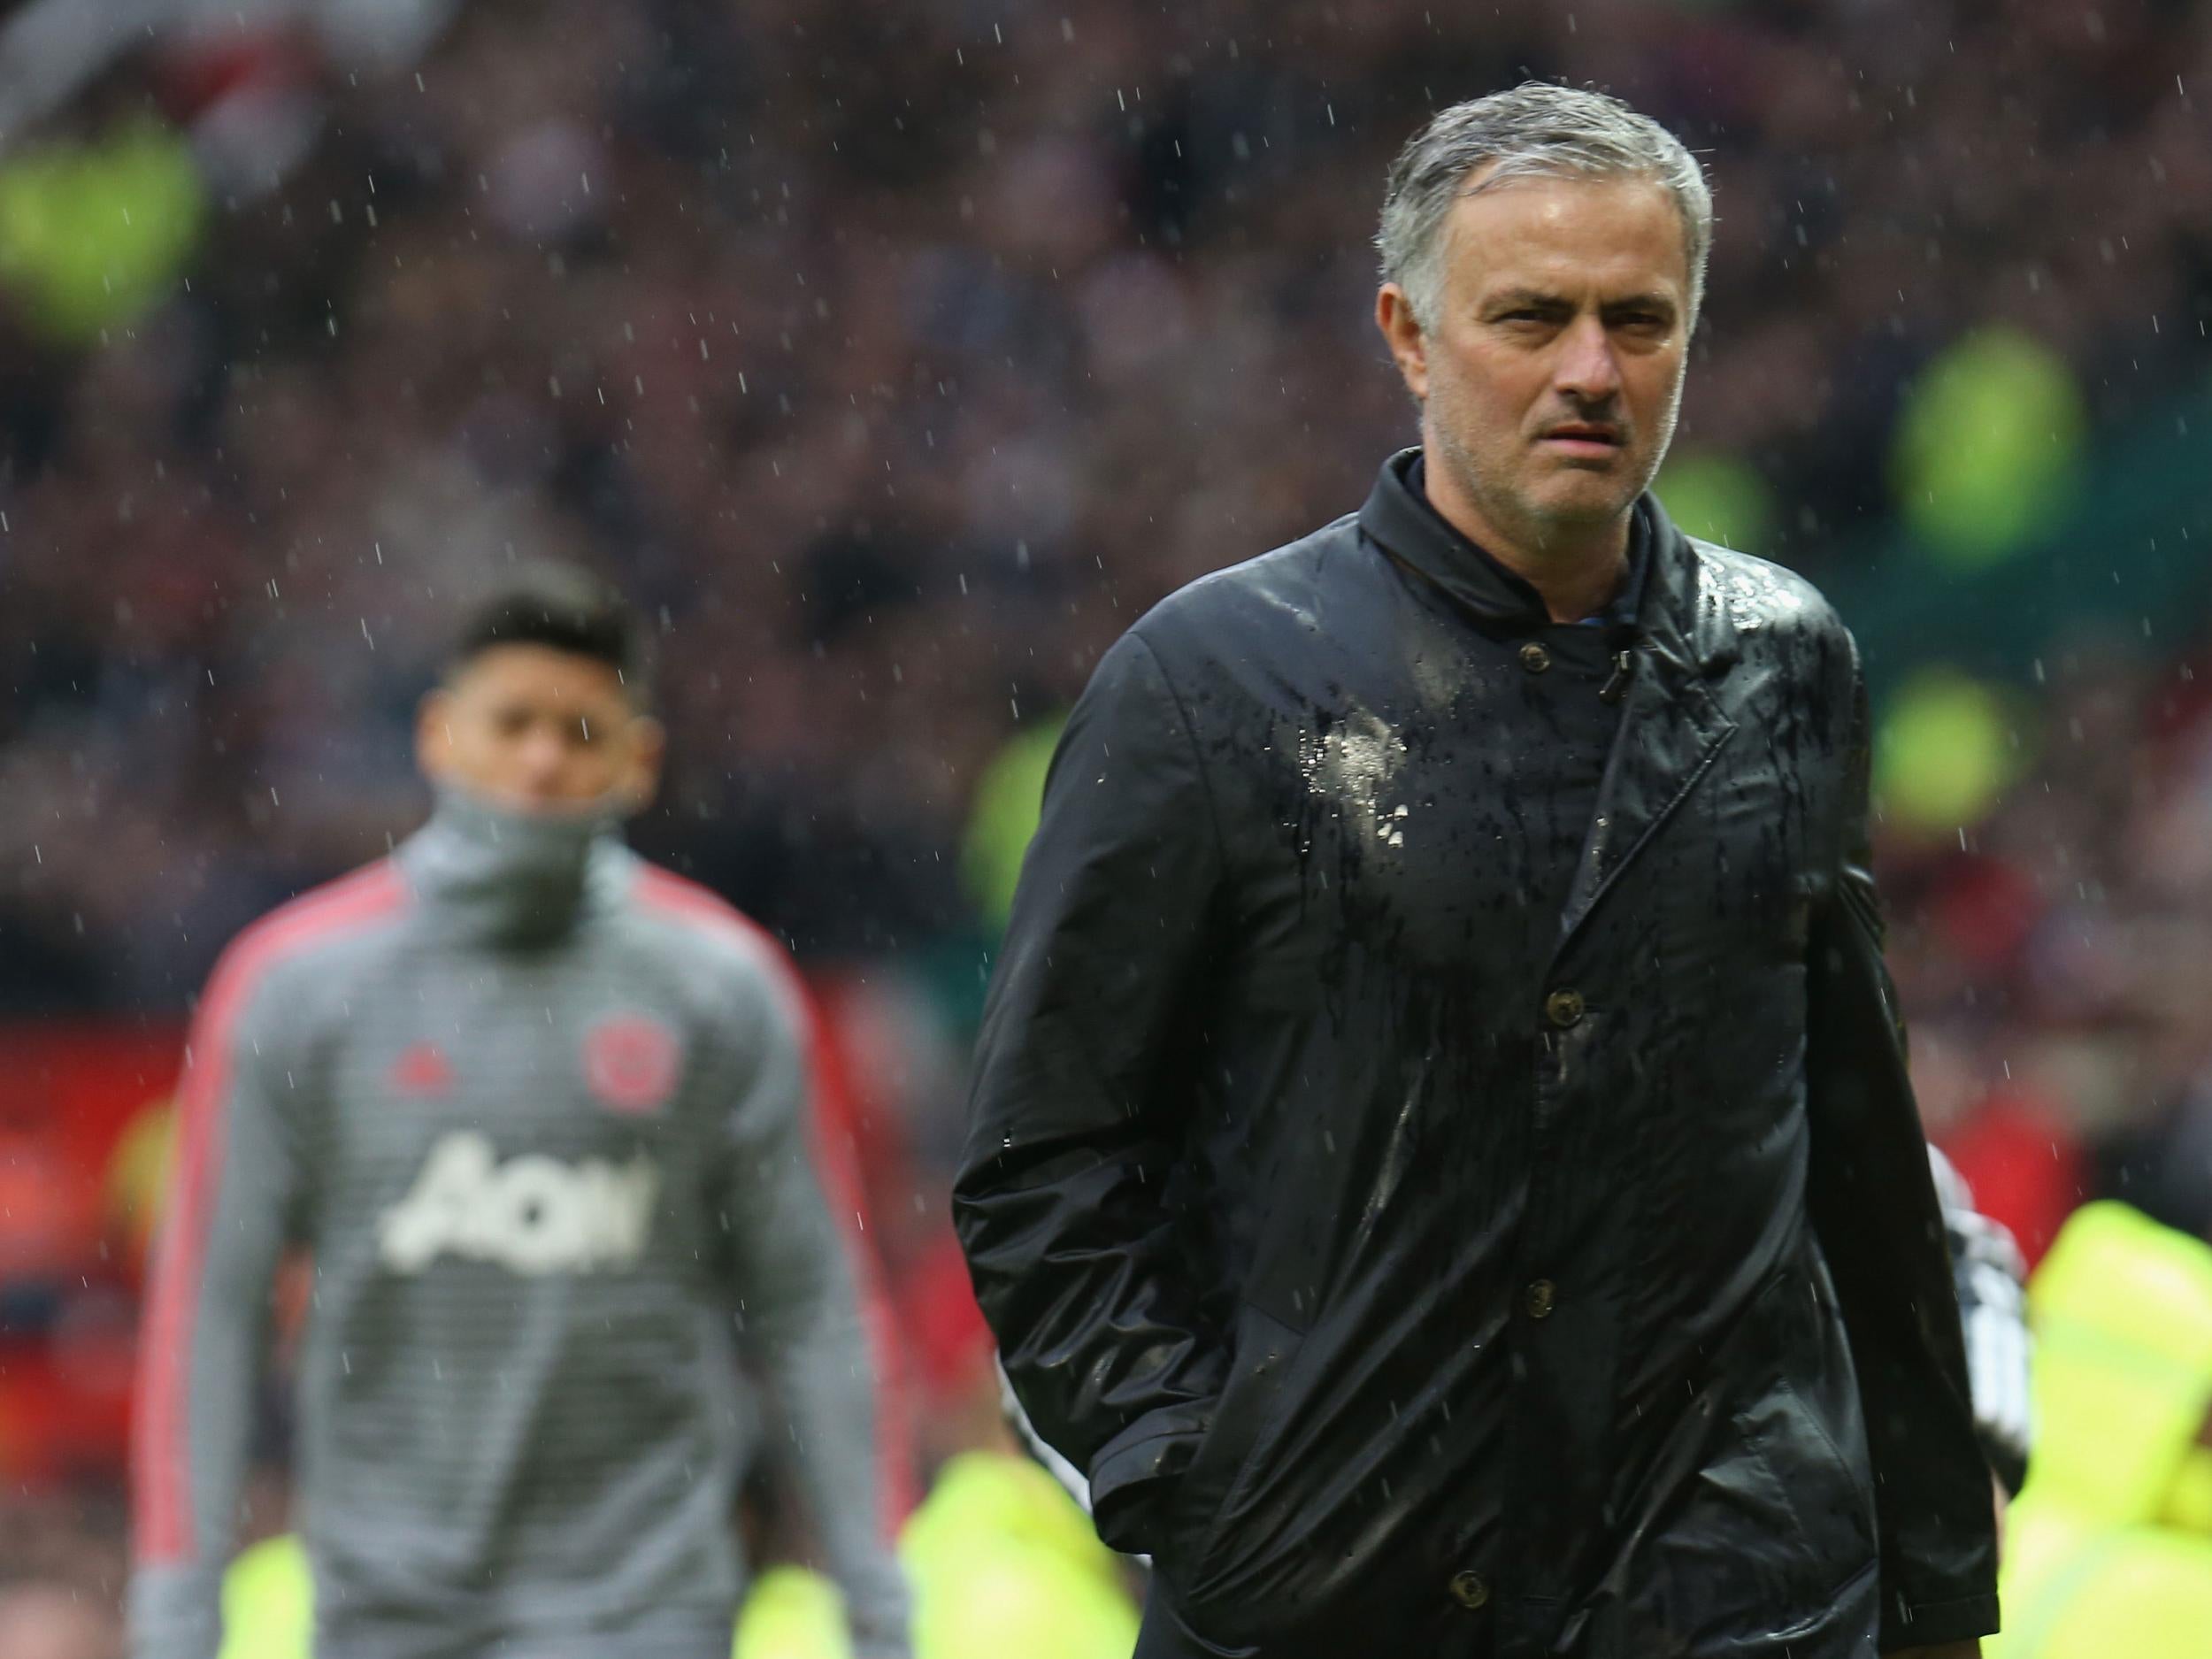 Jose Mourinho believes Manchester United must learn to be more consistent